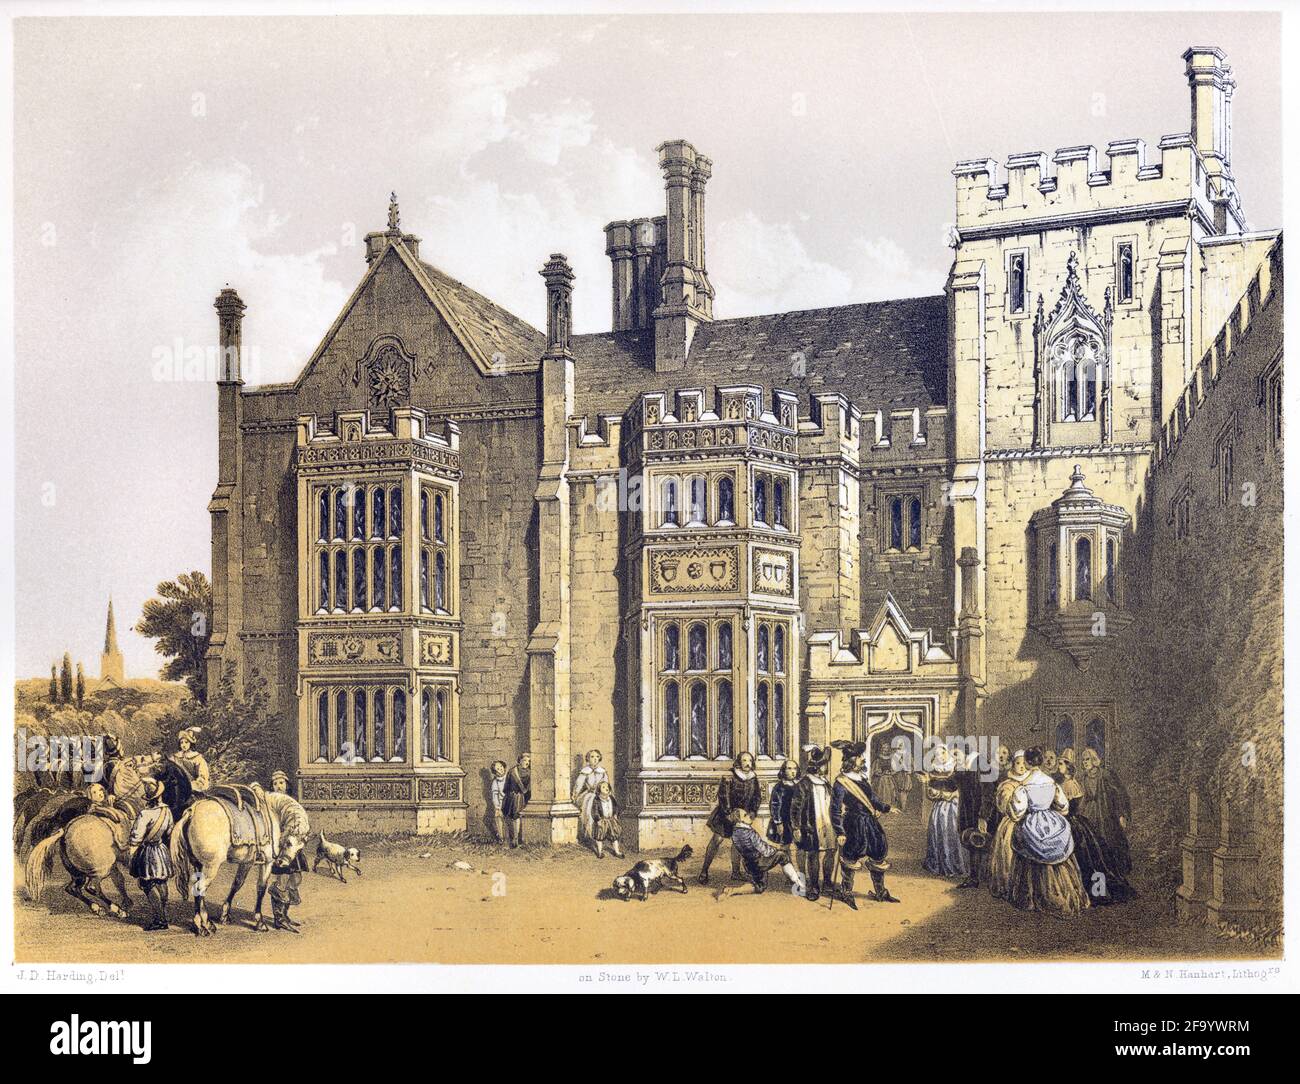 A lithotint of Hinchinbrook (Hinchingbrooke) House, Huntingdonshire (now Cambridgeshire) UK scanned at high resolution from a book printed in 1858. Stock Photo